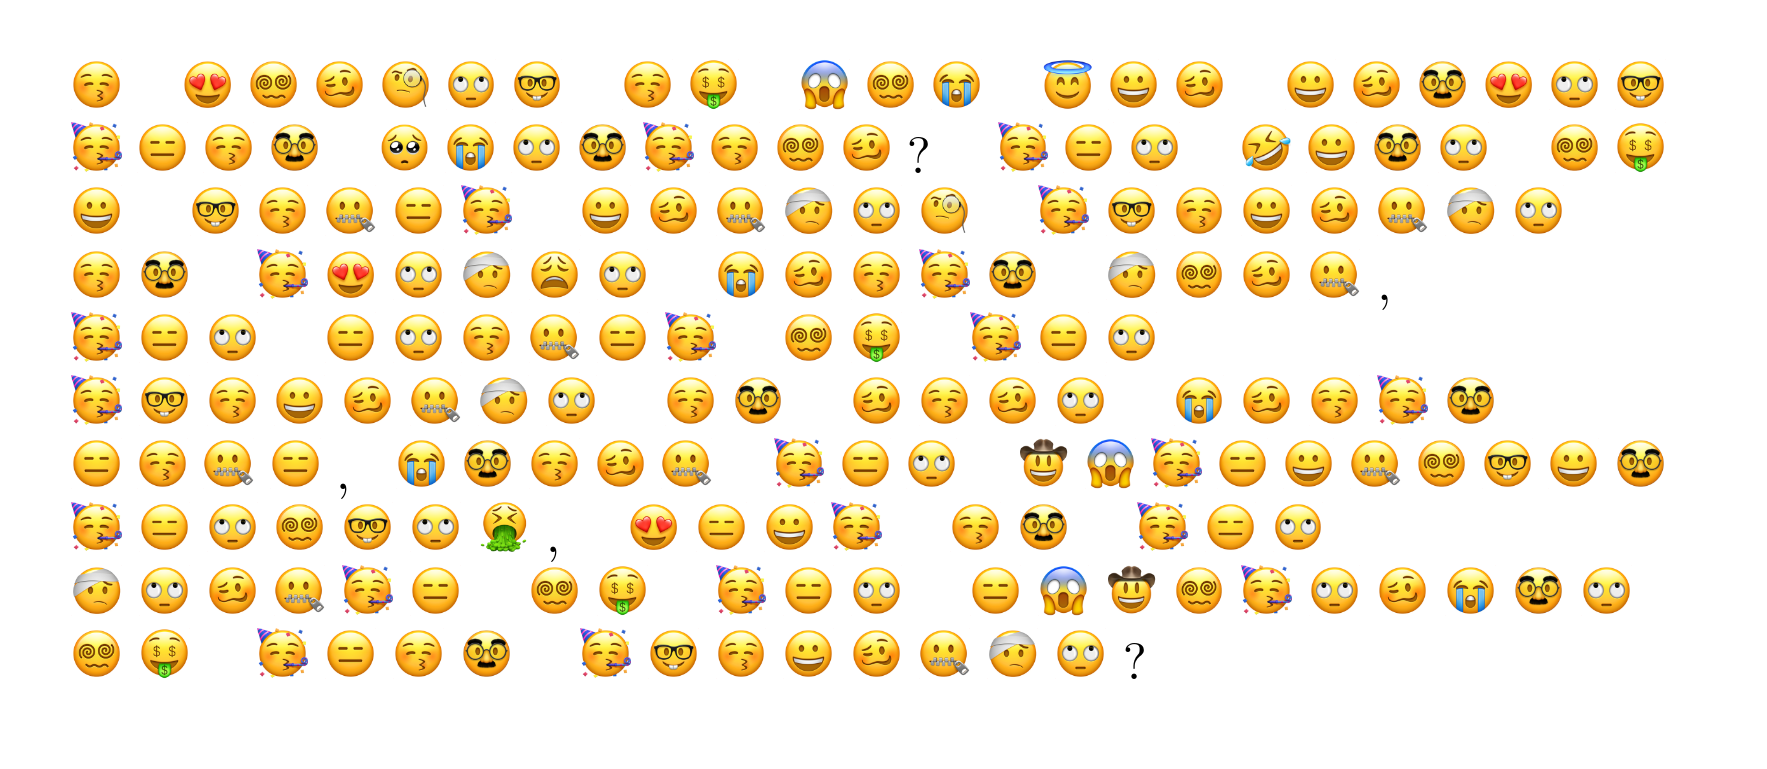  The image has 10 rows.  Each row comprises a sequence of emojis and punctuation characters.  First row: a kissing face with closed eyes, a space, a smiling face with heart eyes, a face with spiral eyes, a woozy face, a face with monocle, a face with rolling eyes, a nerd face, a space, a kissing face with closed eyes, a money mouth face, a space, a face screaming in fear, a face with spiral eyes, a loudly crying face, a space, a smiling face with a halo, a grinning face, a woozy face   Second row: a grinning face, a woozy face, a disguised face, a smiling face with heart eyes, aface with rolling eyes, a nerd face, a space, a partying face, an expressionless face, a kissing face with closed eyes, a disguised face, a space, a pleading face, a loudly crying face, a face with rolling eyes, a disguised face, a partying face, a kissing face with closed eyes, a face with spiral eyes, a woozy face, a question mark, a partying face, an expressionless face, a face with rolling eyes, a space, a ROFL face, a grinning face, a disguised face, a face with rolling eyes, a space, a face with spiral eyes, a money mouth face   Third row: a grinning face, a space, a nerd face, a kissing face with closed eyes, a zipper mouth face, an expressionless face, a partying face, a space, a grinning face, a woozy face, a zipper mouth face, a face with a head bandage, a face with rolling eyes, a face with monocle, a space, a partying face, a nerd face, a kissing face with closed eyes, a grinning face, a woozy face, a zipper mouth face, a face with a head bandage, a face with rolling eyes   Fourth row: a kissing face with closed eyes, a disguised face, a space, a partying face, a smiling face with heart eyes, a face with rolling eyes, a face with a head bandage, a weary face, a face with rolling eyes, a space, a loudly crying face, a woozy face, a kissing face with closed eyes, a partying face, a disguised face, a space, a face with a head bandage, a face with spiral eyes, a woozy face, a zipper mouth face, a comma  Fifth row: a partying face, an expressionless face, a face with rolling eyes, a space, an  expressionless face, a face with rolling eyes, a kissing face with closed eyes, a zipper mouth face, an expressionless face, a partying face, a space, a face with spiral eyes, a money mouth face, a space, a partying face, an expressionless face, a face with rolling eyes,   Sixth row: a partying face, a nerd face, a kissing face with closed eyes, a grinning face, a woozy face, a zipper mouth face, a face with a head bandage, a face with rolling eyes, a space, a kissing face with closed eyes, a disguised face, a space, a woozy face, a kissing face with closed eyes, a woozy face, a face with rolling eyes, a space, a loudly crying face, a woozy face, a kissing face with closed eyes, a partying face, a disguised face,   Seventh row: an expressionless face, a kissing face with closed eyes, a zipper mouth face, an expressionless face, a full stop, a loudly crying face, a disguised face, a kissing face with closed eyes, a woozy face, a zipper mouth face, a space, a partying face, an expressionless face, a face with rolling eyes, a space, a face wearing a cowboy hat, a face screaming in fear,  a partying face, an expressionless face, a grinning face, a zipper mouth face, a face withspiral eyes, a nerd face, a grinning face, a disguised face,   Eighth row: a partying face, an expressionless face, a face with rolling eyes, a face with spiral eyes, a nerd face, a face with rolling eyes, a face vomiting, a comma, a space, a smiling face with heart eyes, an expressionless face, a grinning face, a partying face, a space, a kissing face with closed eyes, a disguised face, a space, a partying face, an expressionless face, a face with rolling eyes,   Ninth row: a face with a head bandage, a face with rolling eyes, a woozy face, a zipper mouth face, a partying face, an expressionless face, a space, a face with spiral eyes, a money mouth face, a space, a partying face, an expressionless face, a face with rolling eyes, a space, an expressionless face, a face screaming in fear, a face wearing a cowboy hat, a face with spiral eyes, a partying face, a face with rolling eyes, a woozy face, a loudly crying face, a disguised face, a face with rolling eyes,   Tenth row: a face with spiral eyes, a money mouth face, a space, a partying face, an expressionless face, a kissing face with closed eyes, a disguised face, a space, a partying face, a nerd face, a kissing face with closed eyes, a grinning face, a woozy face, a zipper mouth face, a face with a head bandage, a face with rolling eyes, a question mark